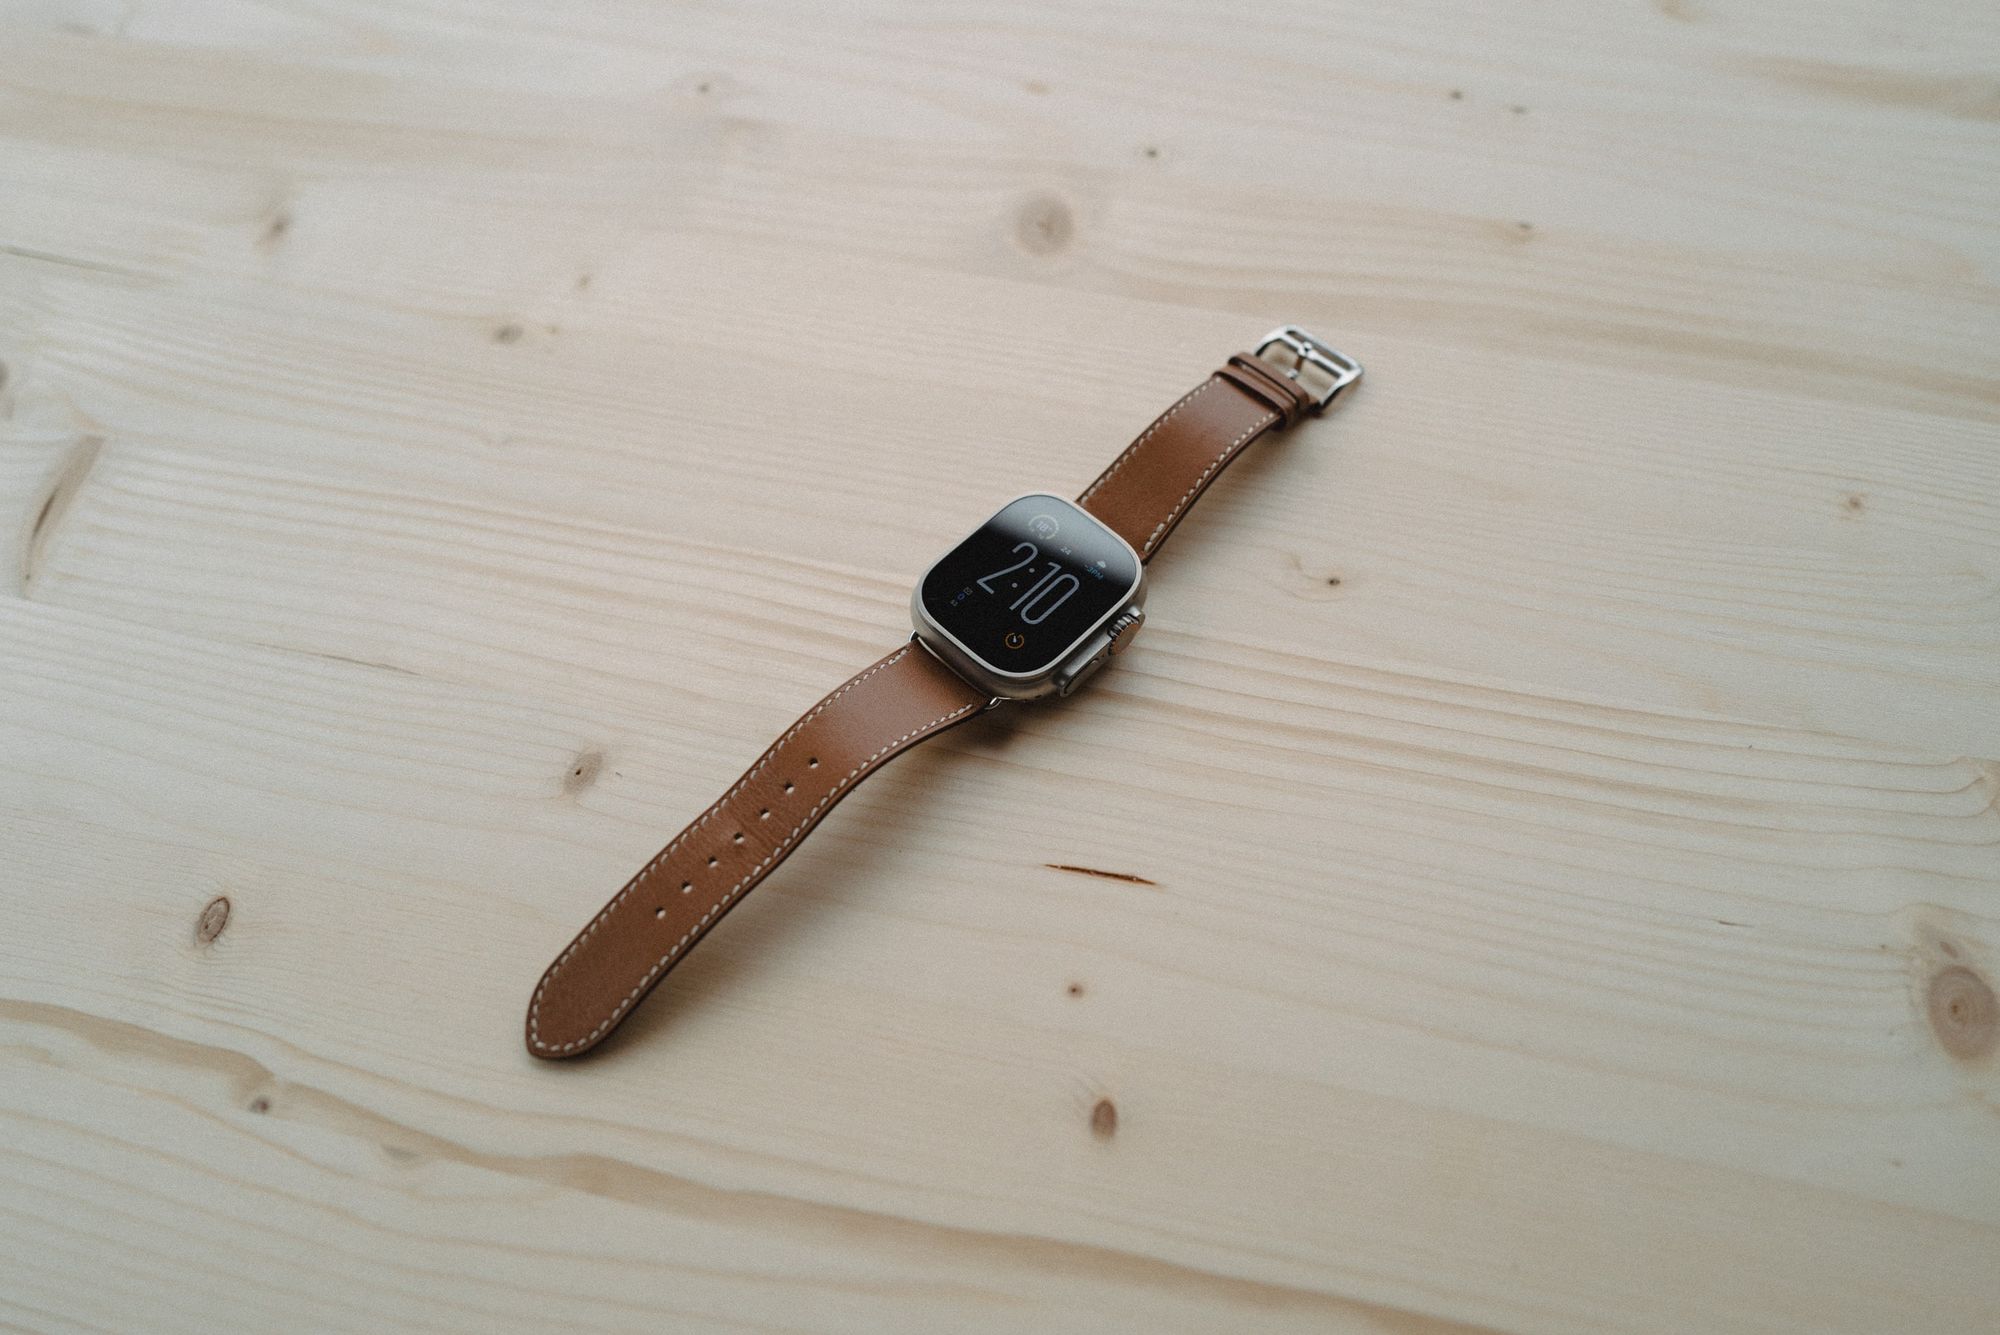 The Infinity Loops Honeymoon Suite Apple Watch Leather Band is the best knock-off Watch band I’ve ever come across. I actually think it’s genuine.